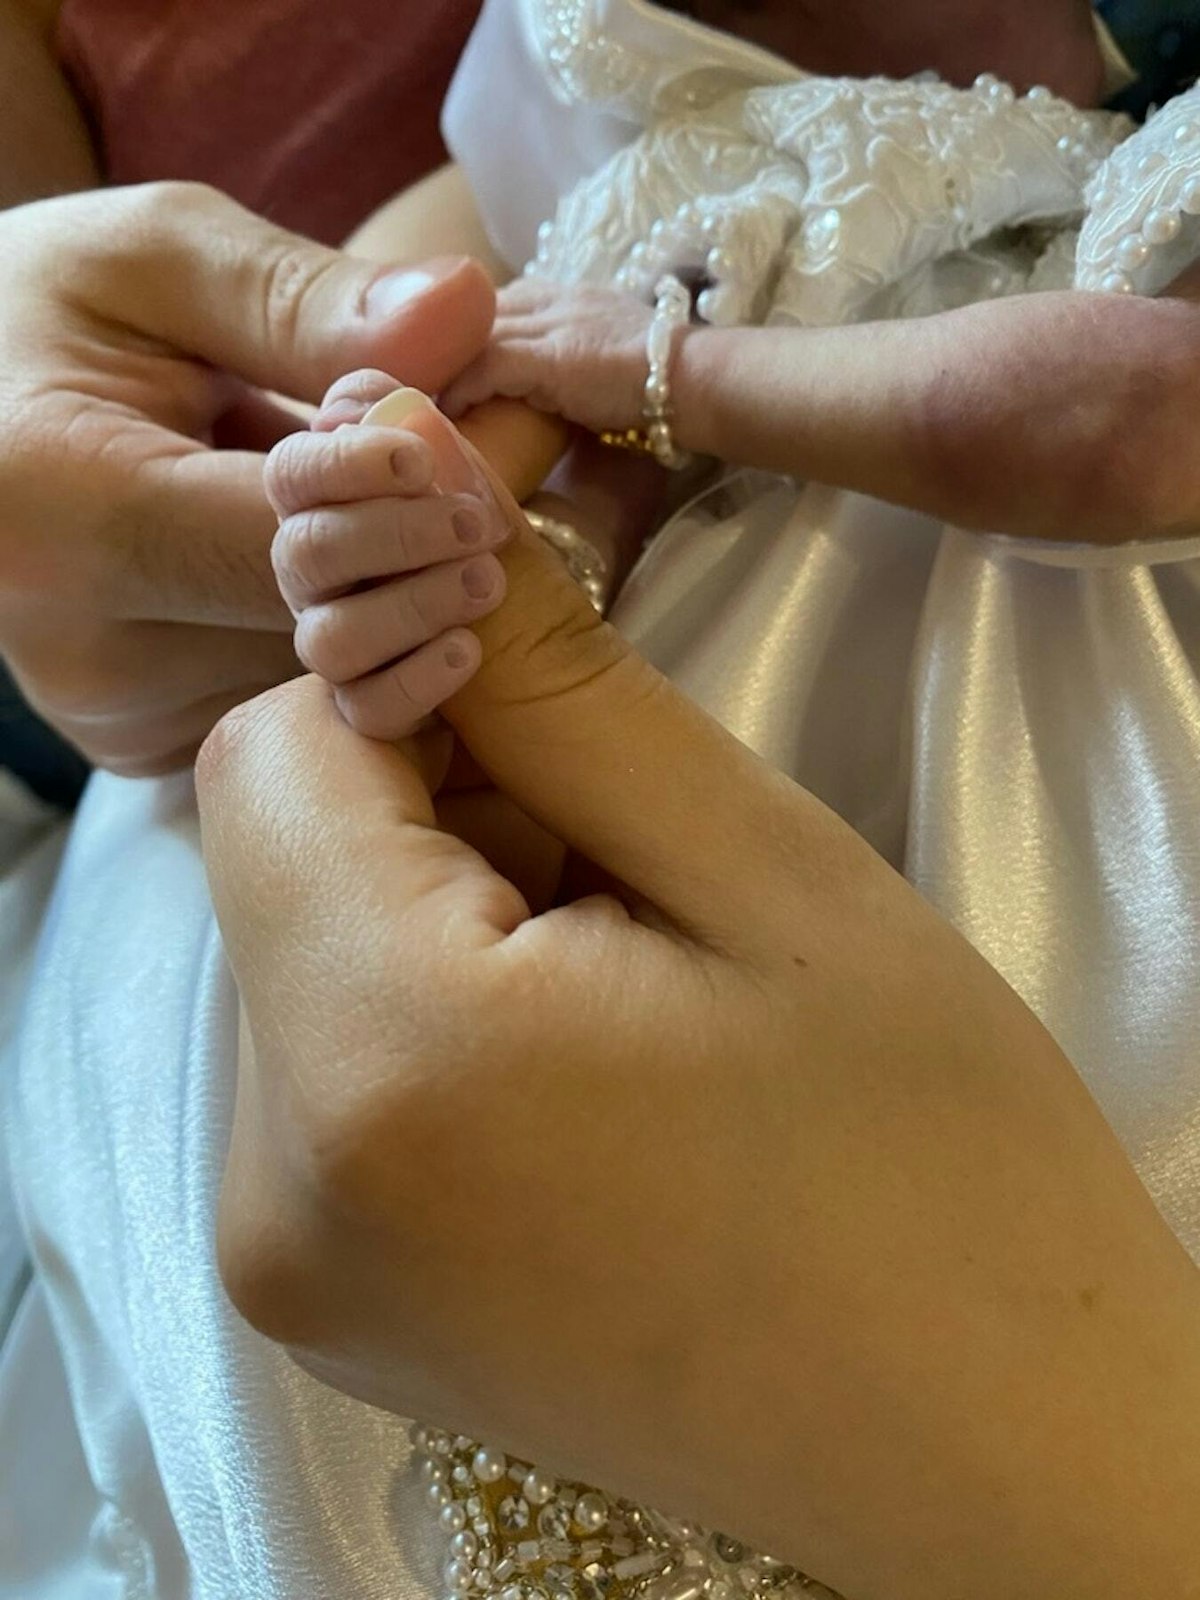 Nicole Duque tenderly holds the hand of her precious twins, Maria Theresa and Rachel Clare.